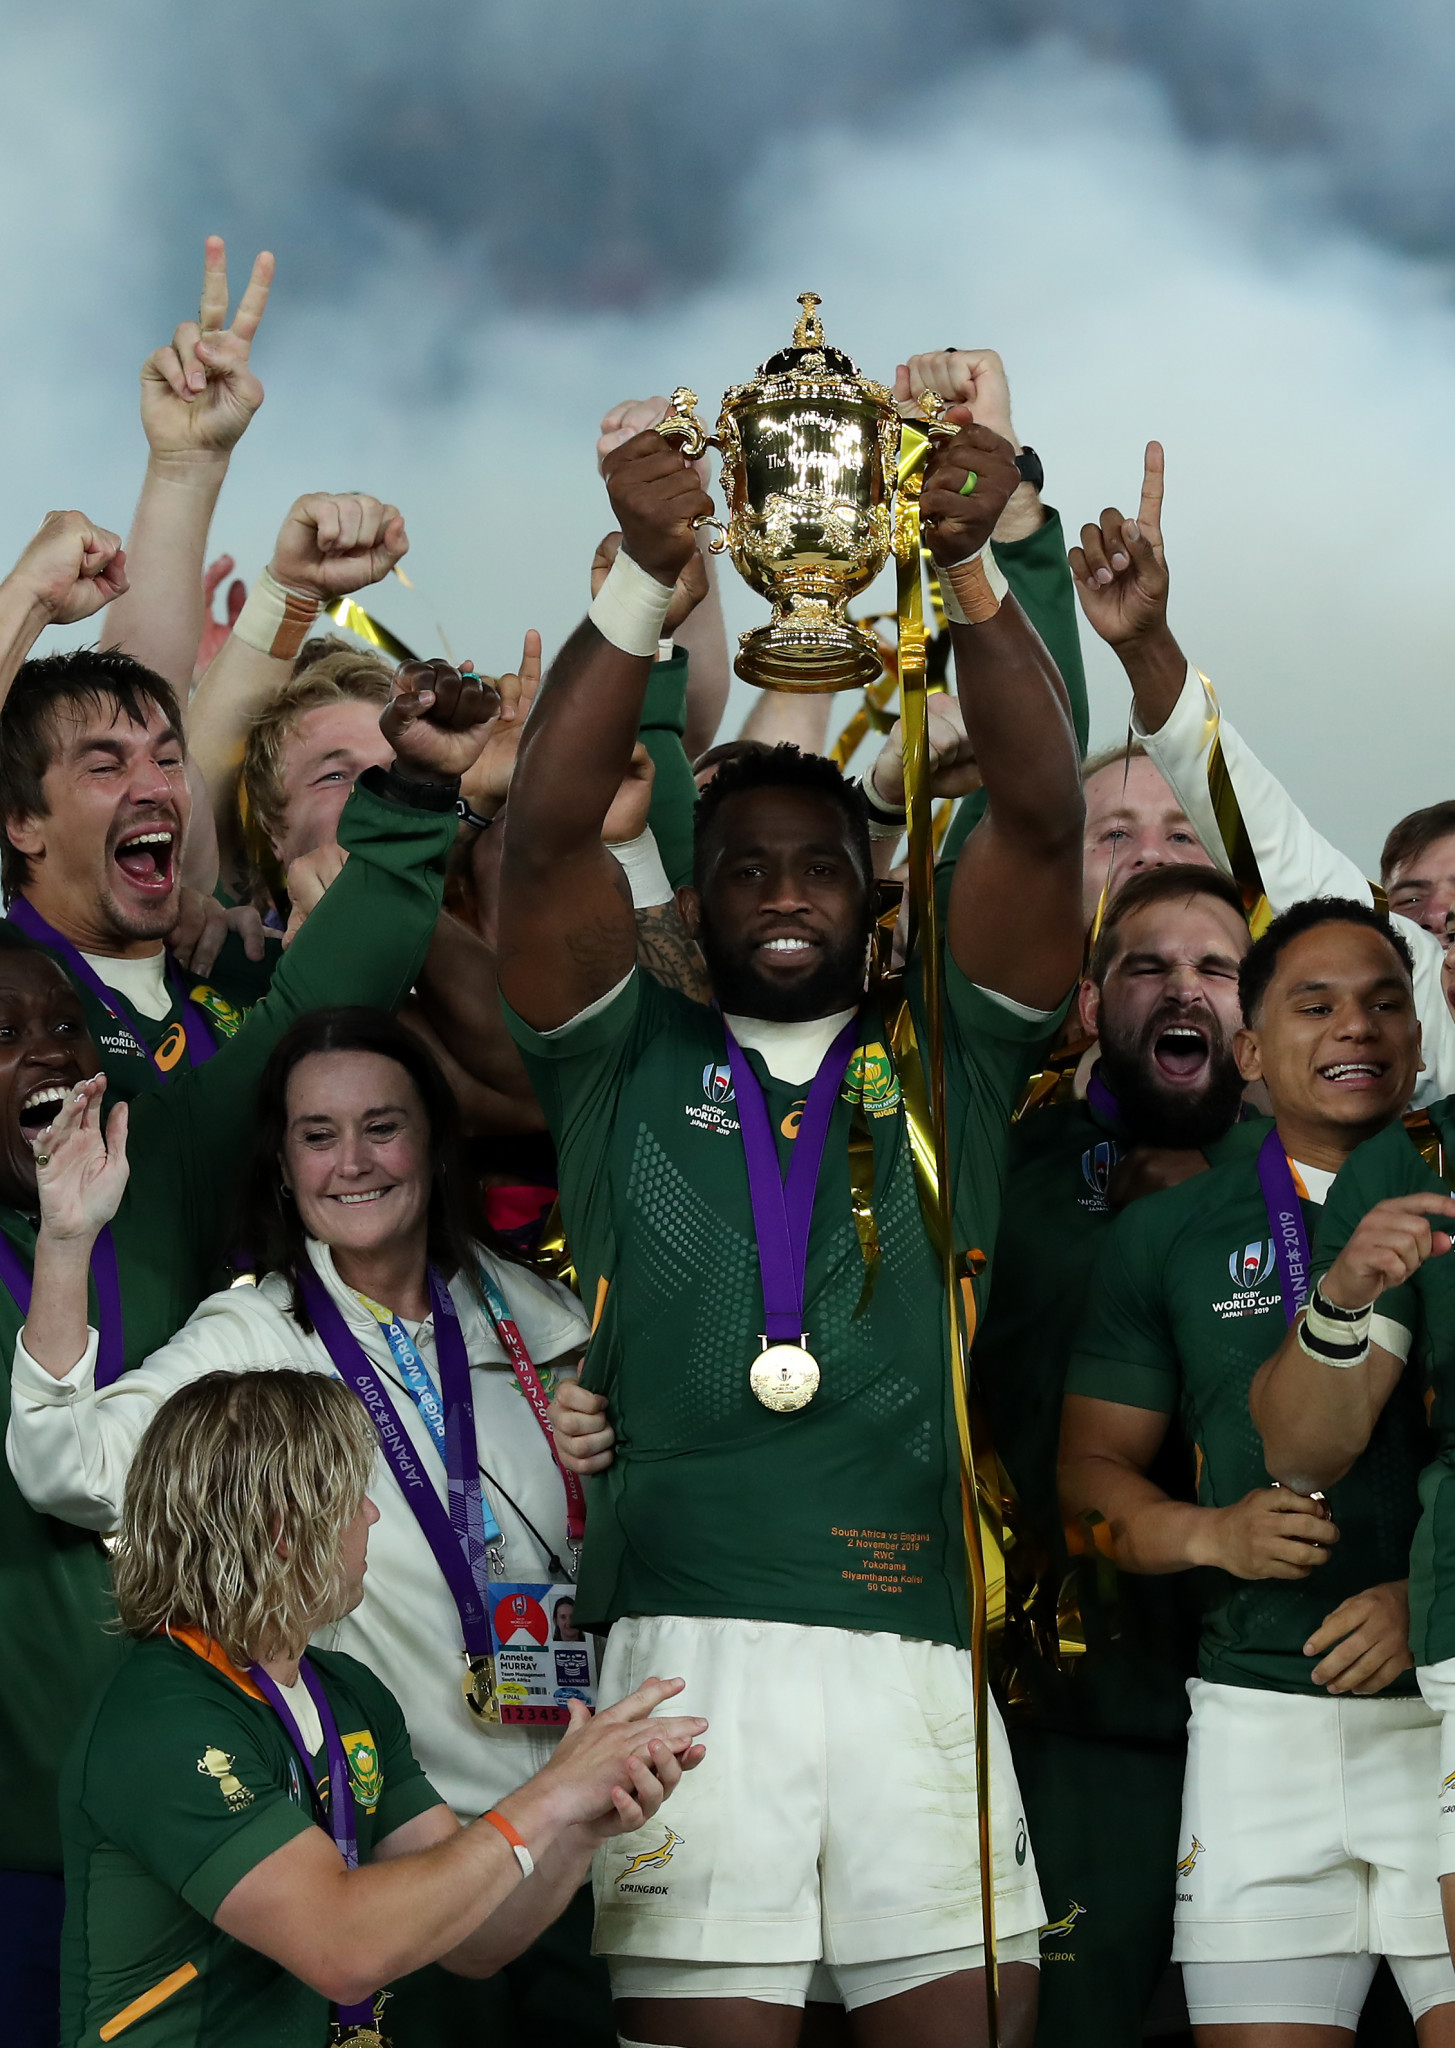 Kolisi hopeful South Africa's Rugby World Cup triumph will inspire kids back home